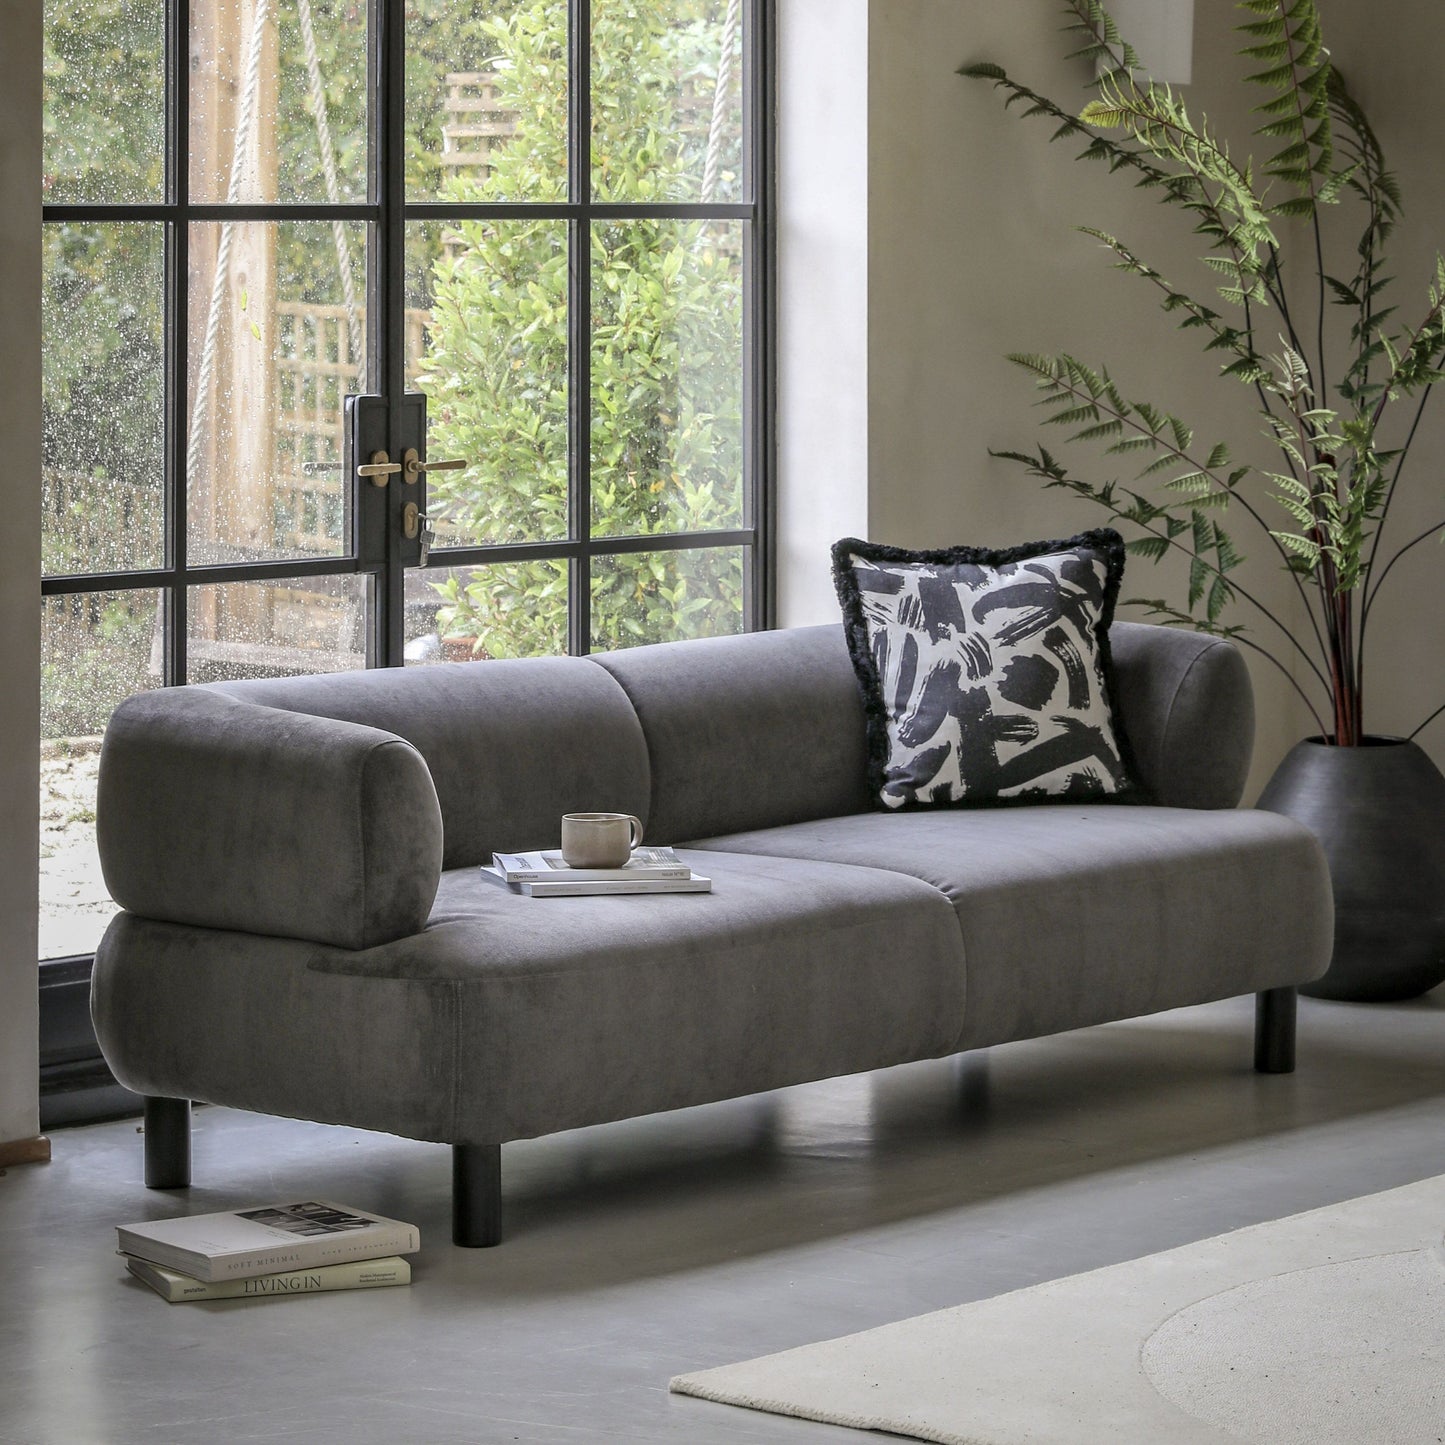 Alfred 3 Seater Sofa in Stone Grey